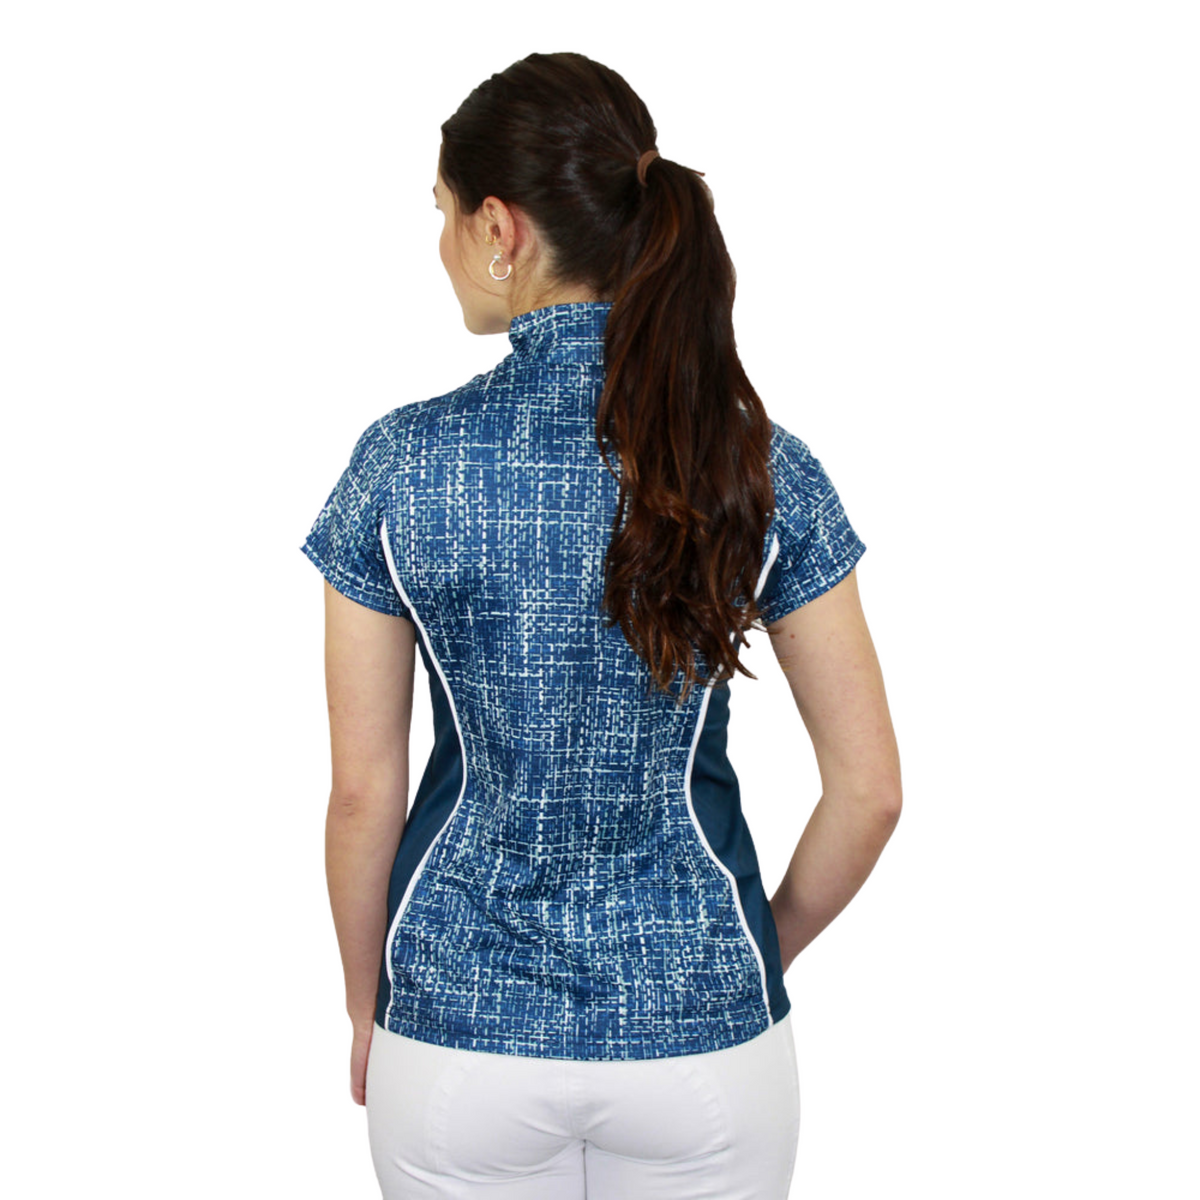 back view of blue and white top